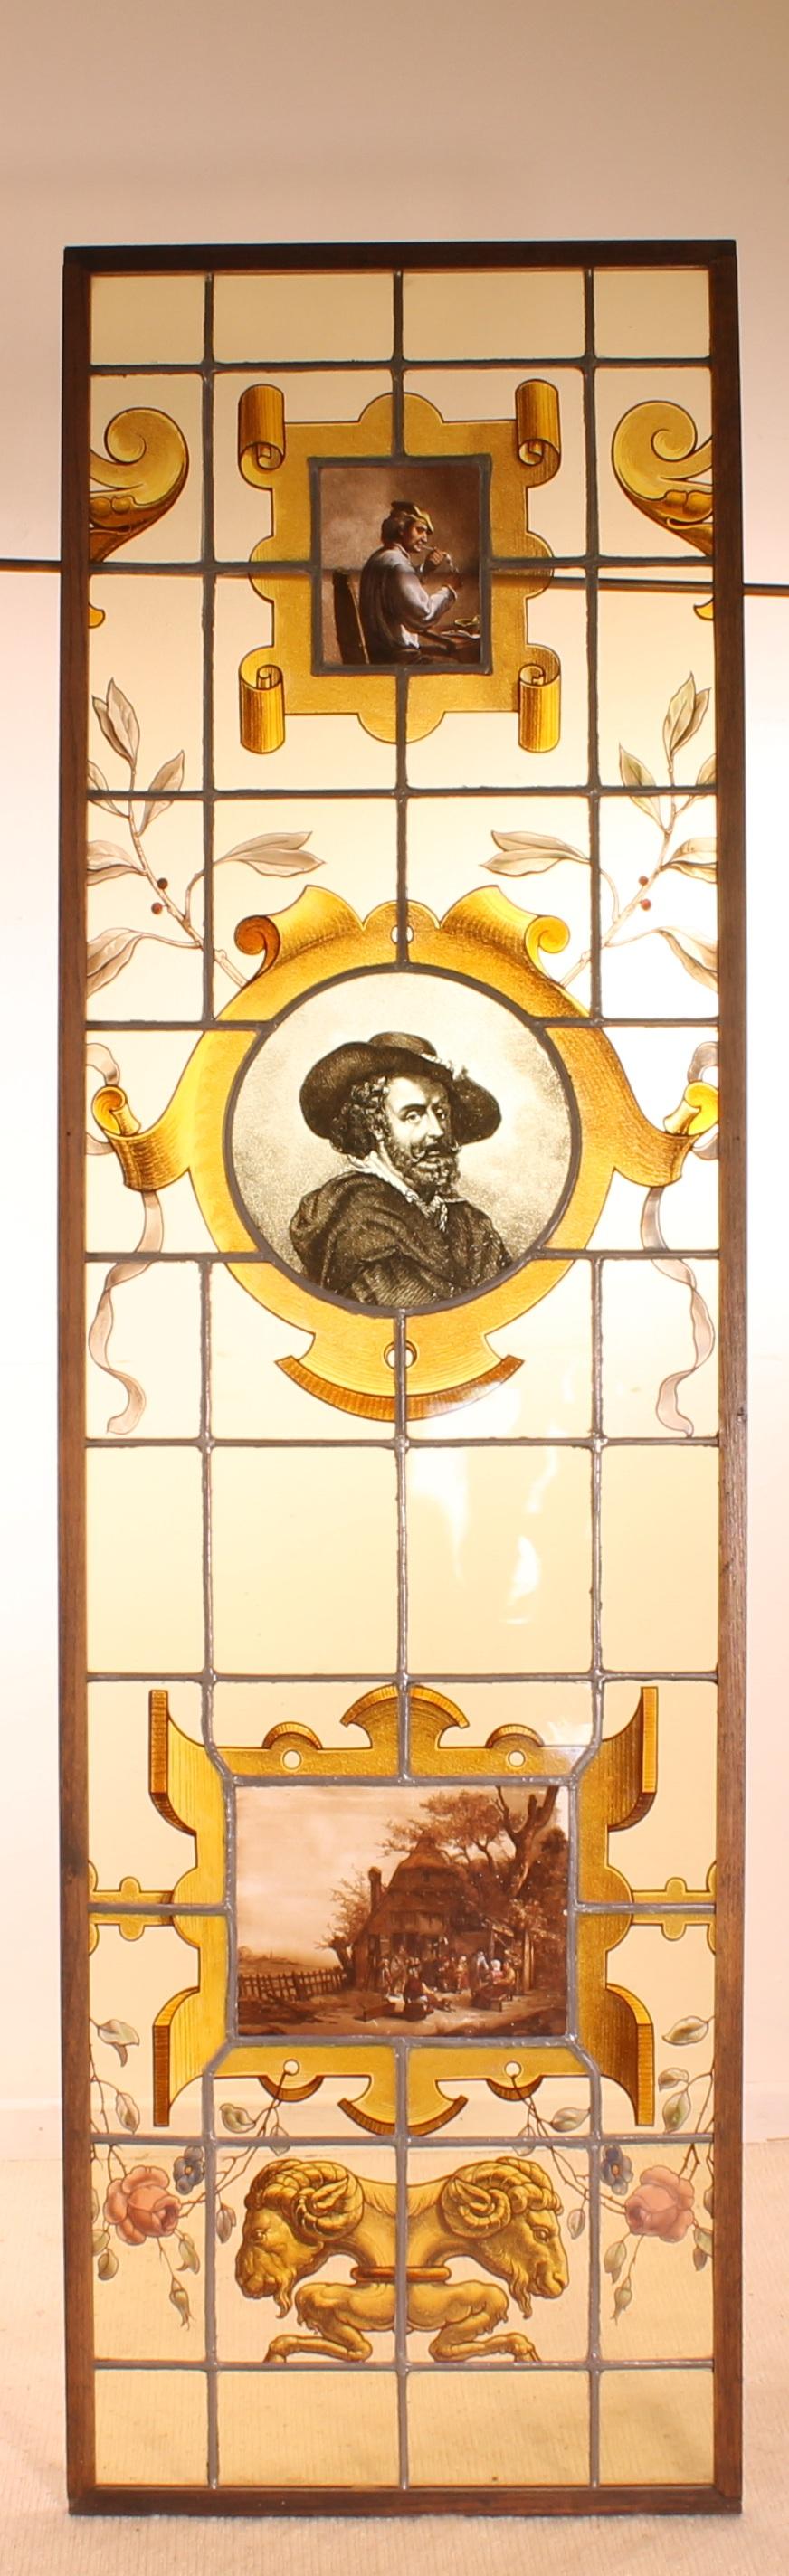 - Magnificent set of 4 windows of the 19th century representing the great painters of the Flemish Renaissance.
At the top of each stained-glass window are men playing guitar, smoking a pipe or drinking a beer and at the bottom of each stained-glass